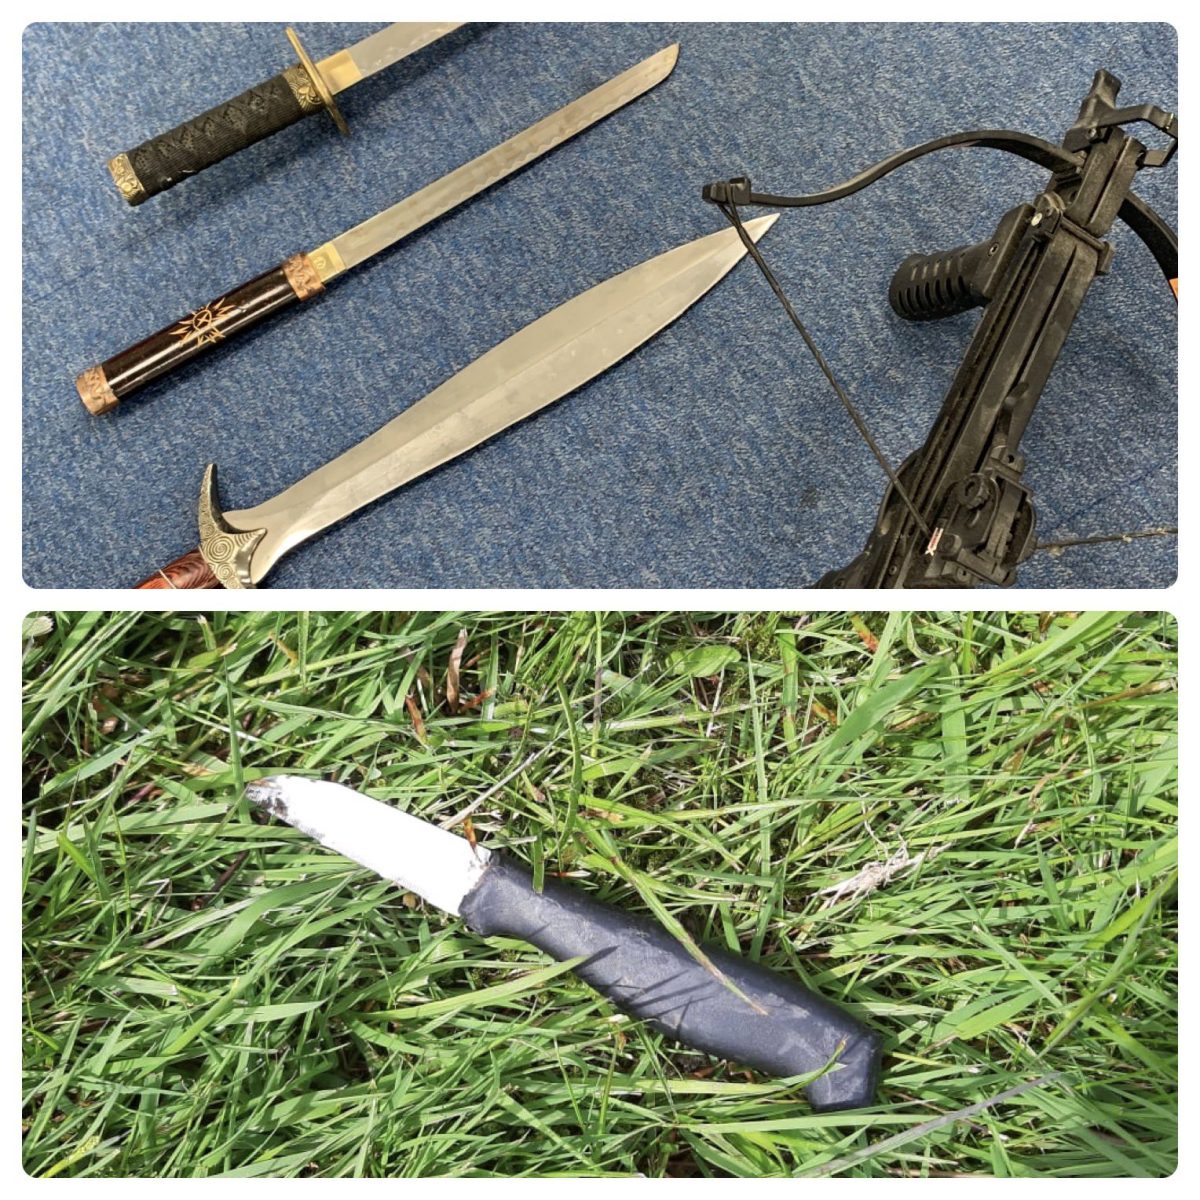 Malvern police remain sharp during Operation Sceptre anti knife crime campaign